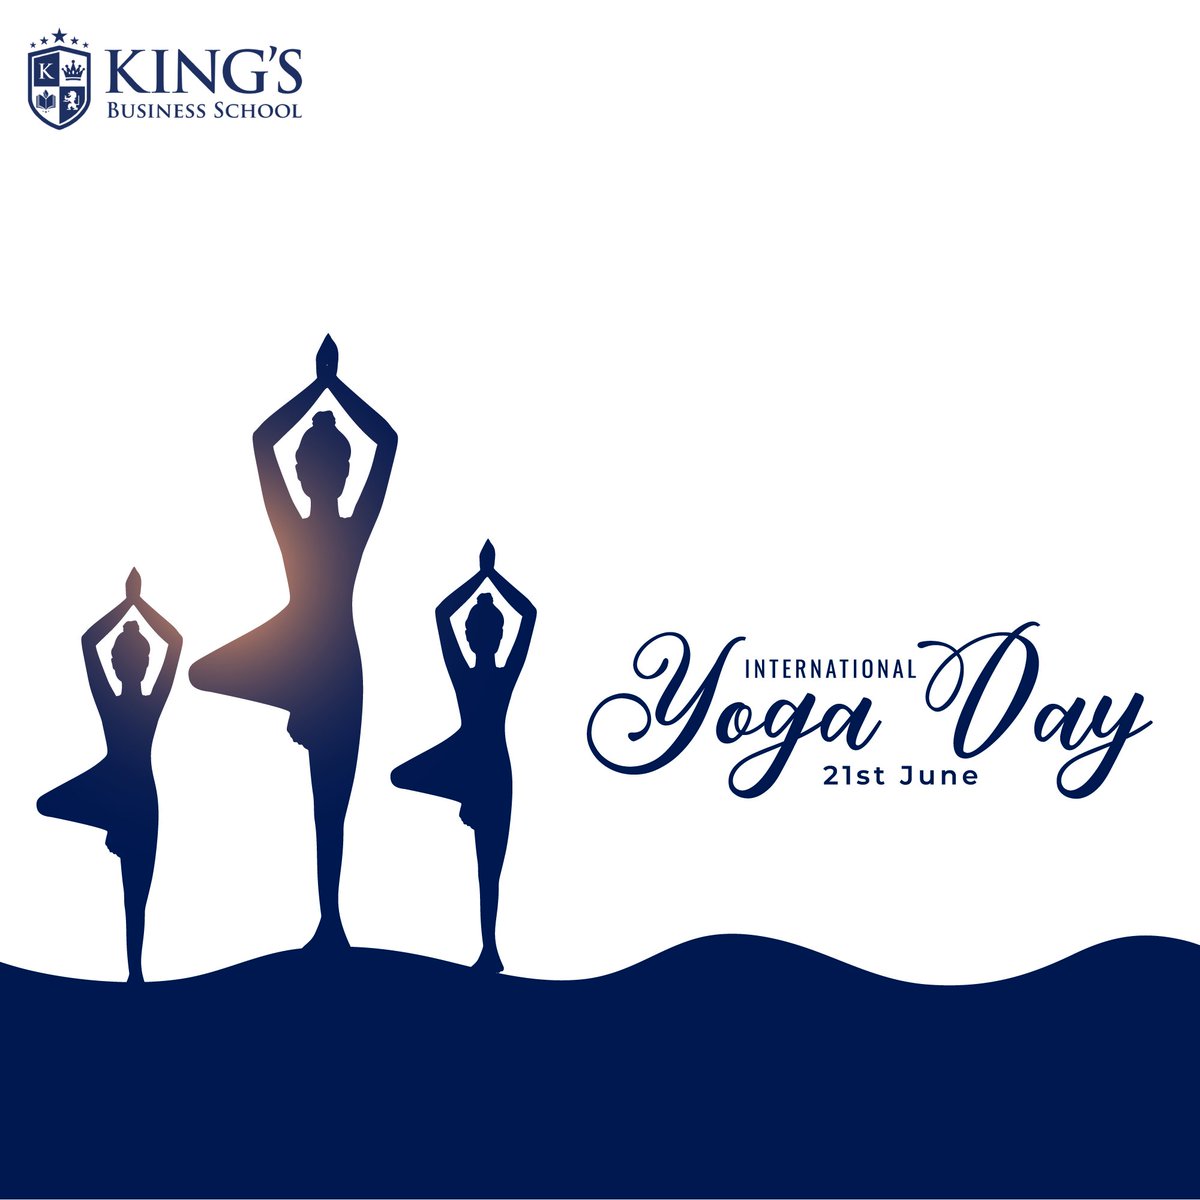 On this International Yoga Day, let us embrace the harmony of body, mind, and spirit that yoga brings. May your practice be a source of strength and serenity.

#internationalyogaday2023 #yogaday #yogajourney #yogaspirituality #yogaforwellness #yogaeveryday #yogalife